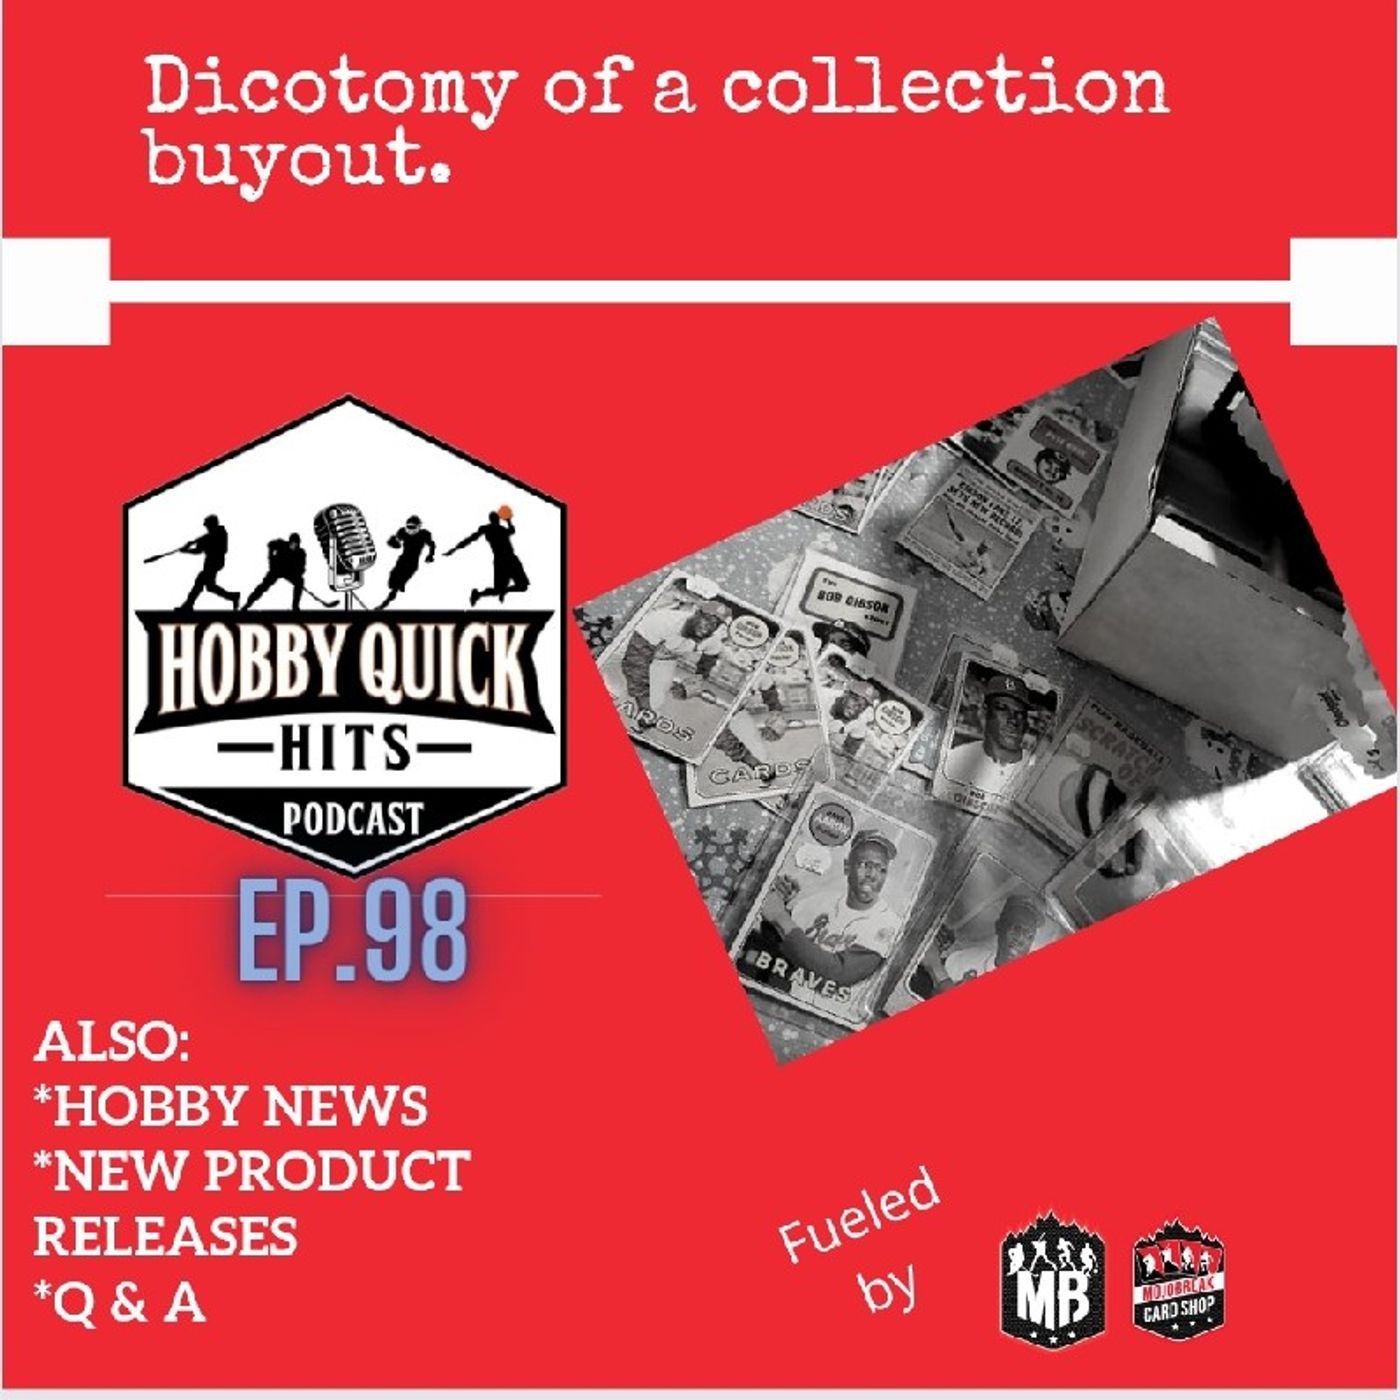 Hobby Quick Hits Ep.98 Dicotomy of a Deal